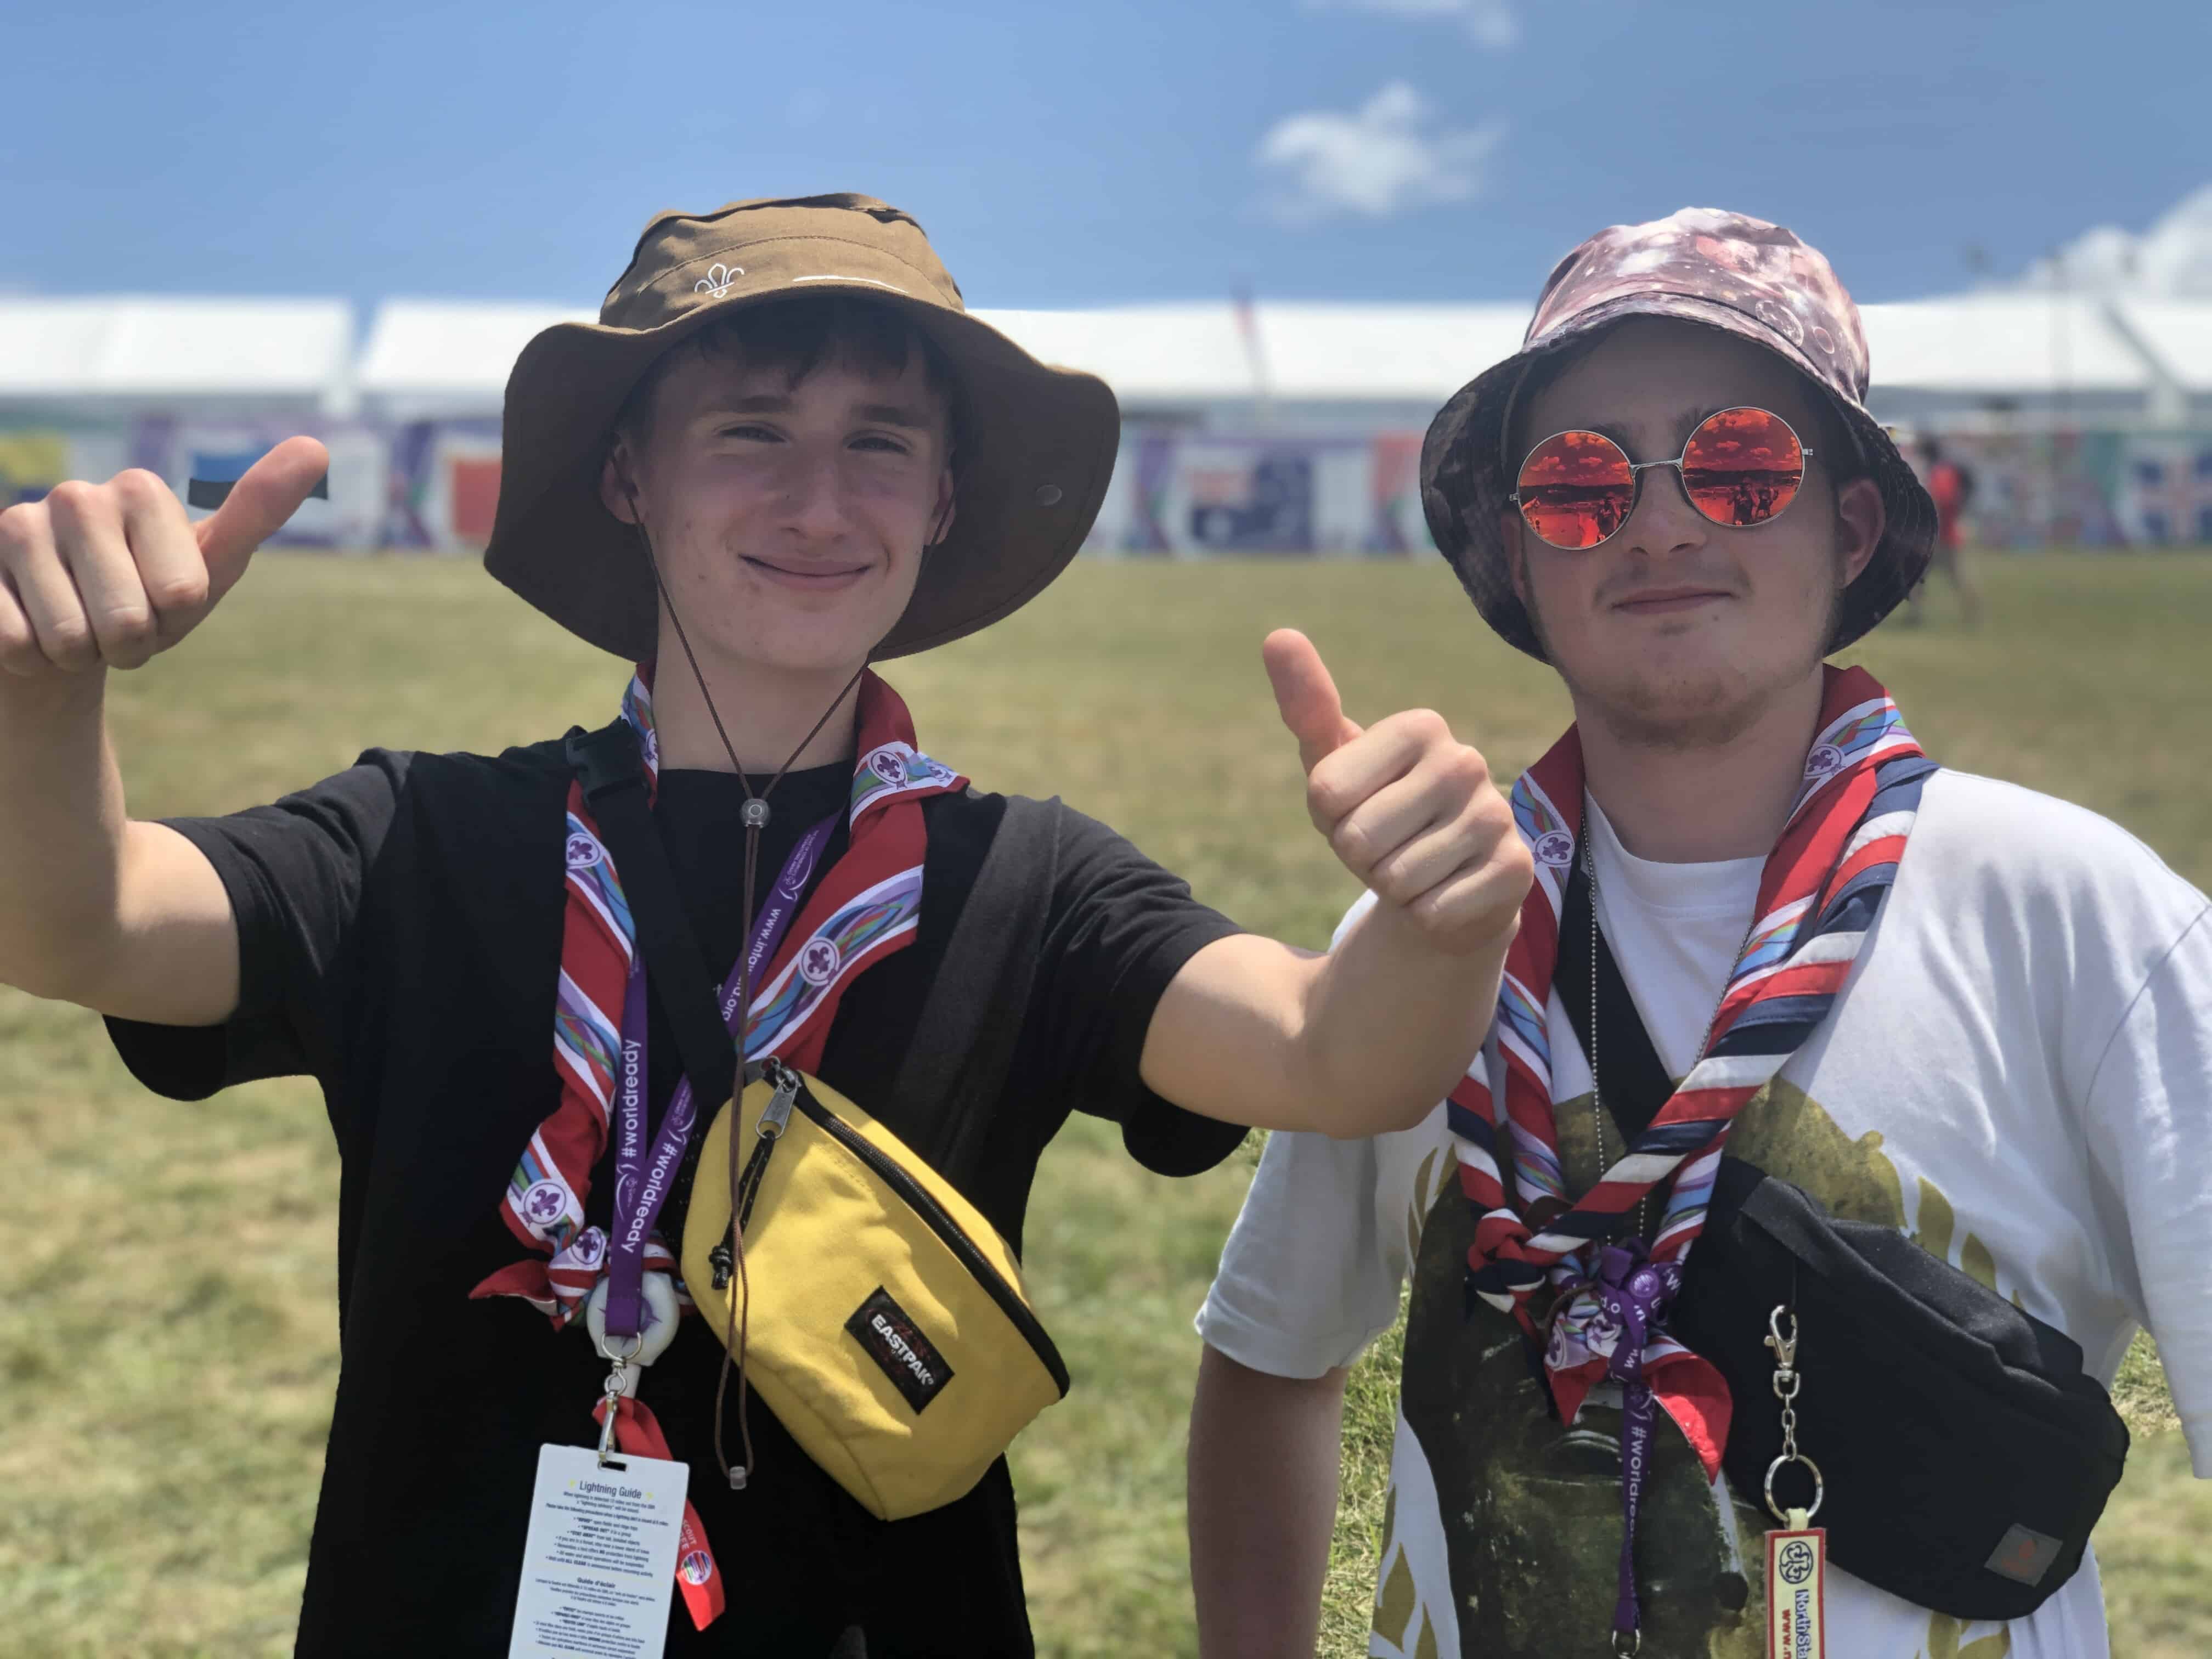 Pictured is Flynn and Tadhq O'Rourke from Hernes Hill. Photo provided from media@glsescouts.org.uk.